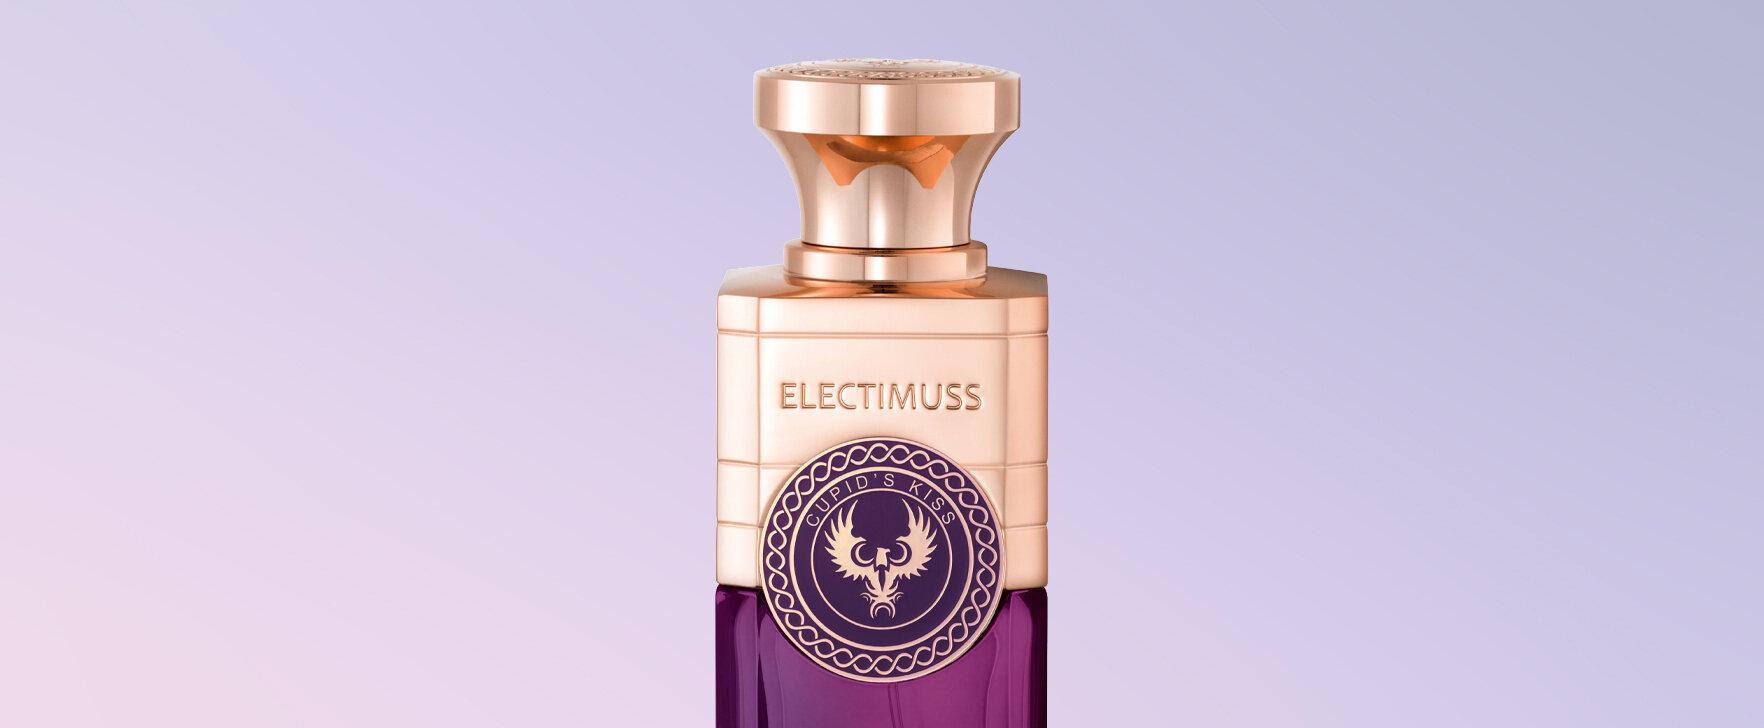 An Ode to the Diversity of Love: The New Perfume "Cupid's Kiss" by Electimuss